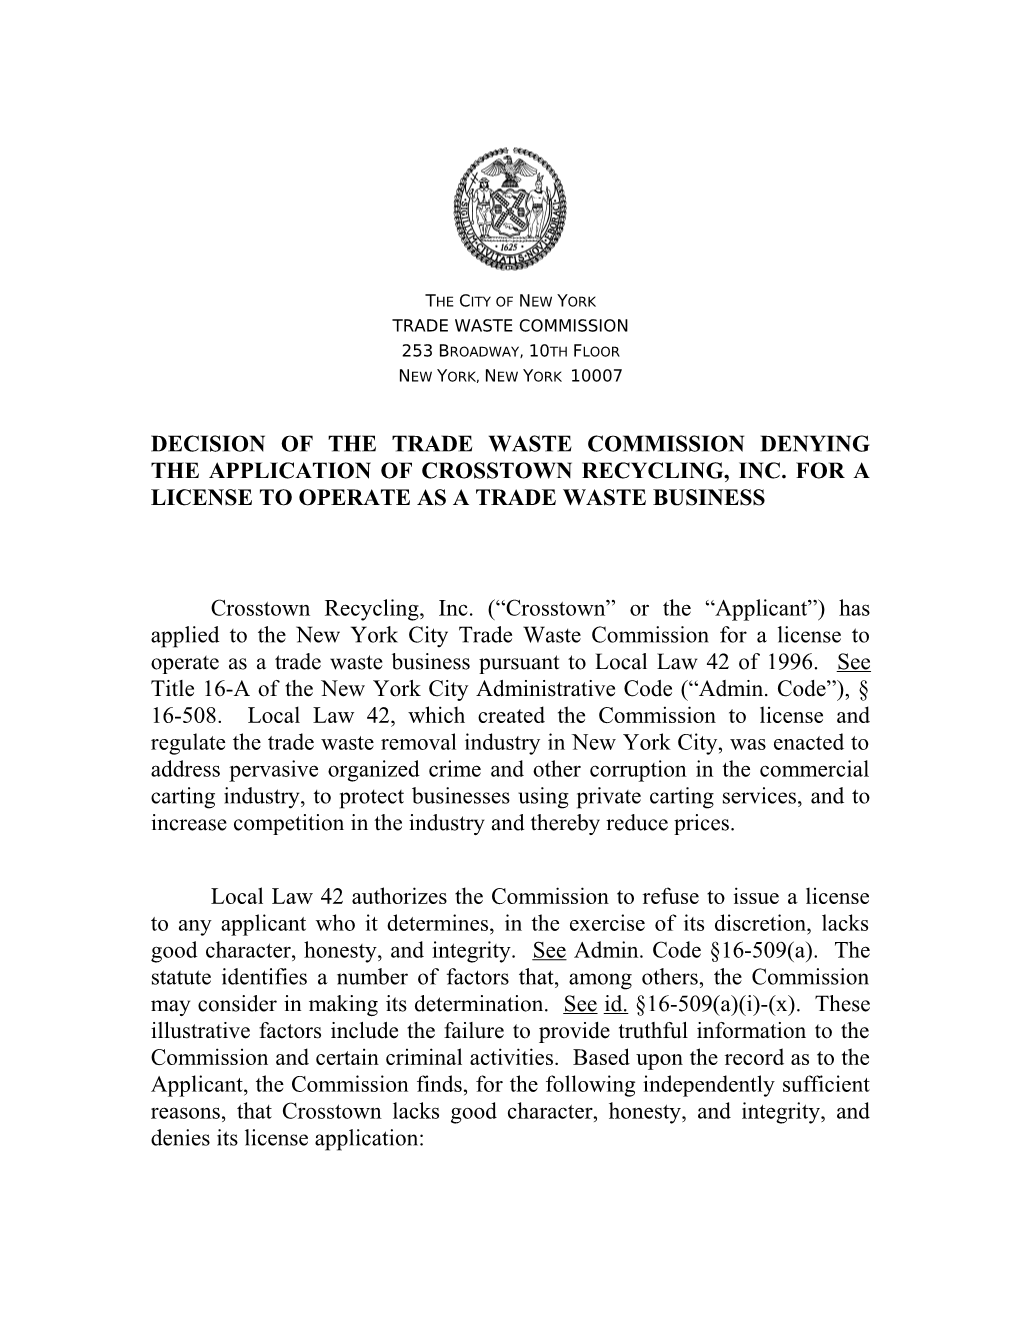 Recommendation That the Trade Waste Commission Deny the Applications of Staten Island Carting